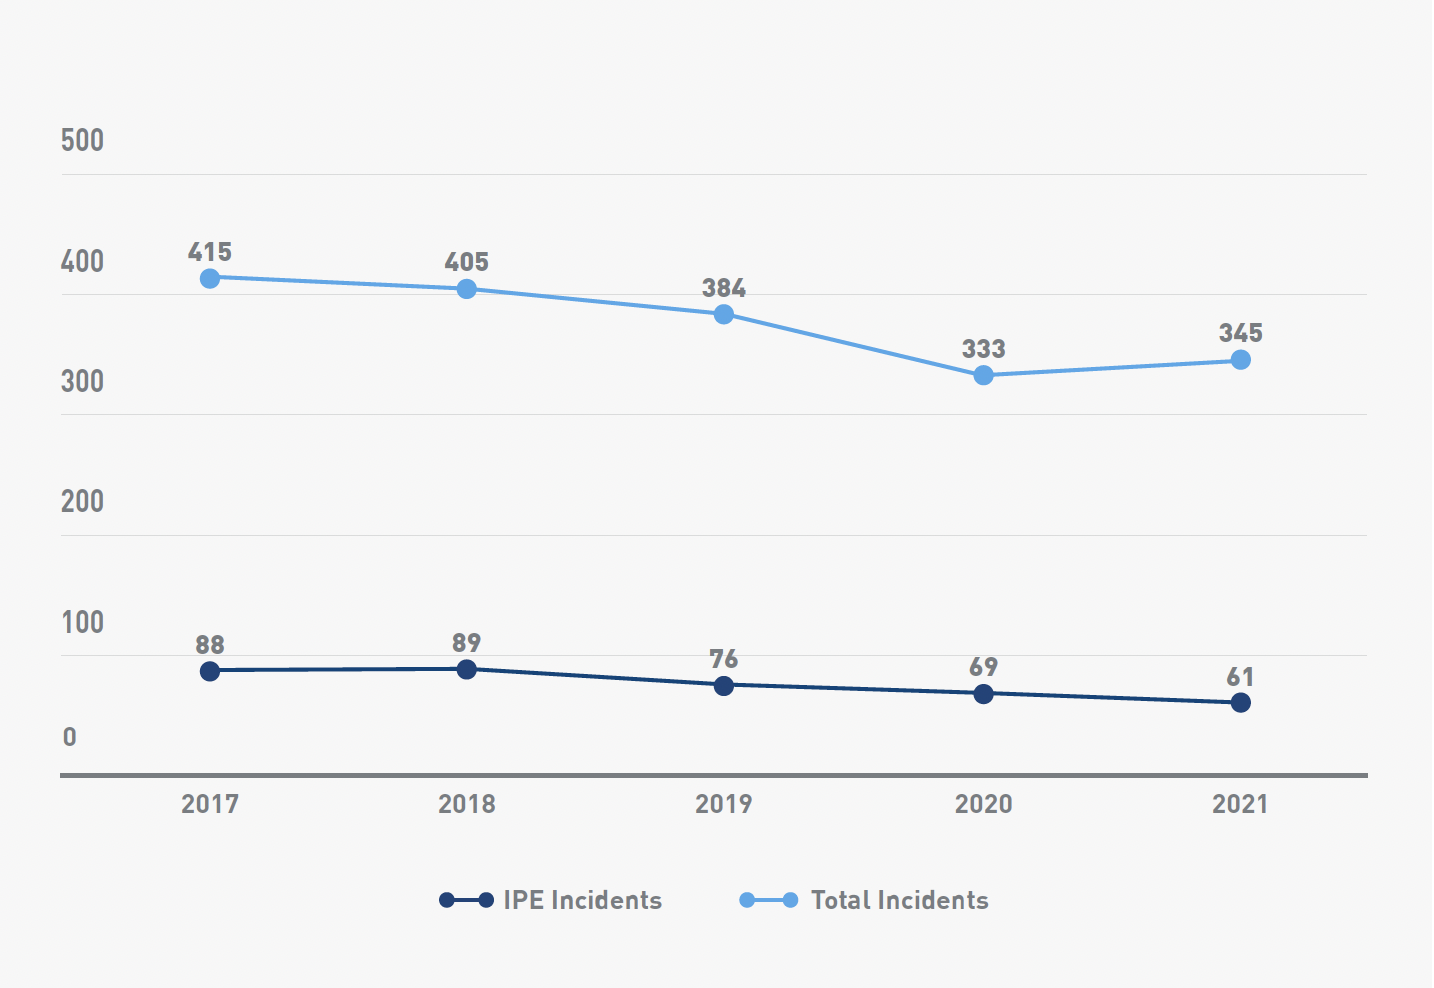 Graph of Total Incidents and Total IPE Incidents